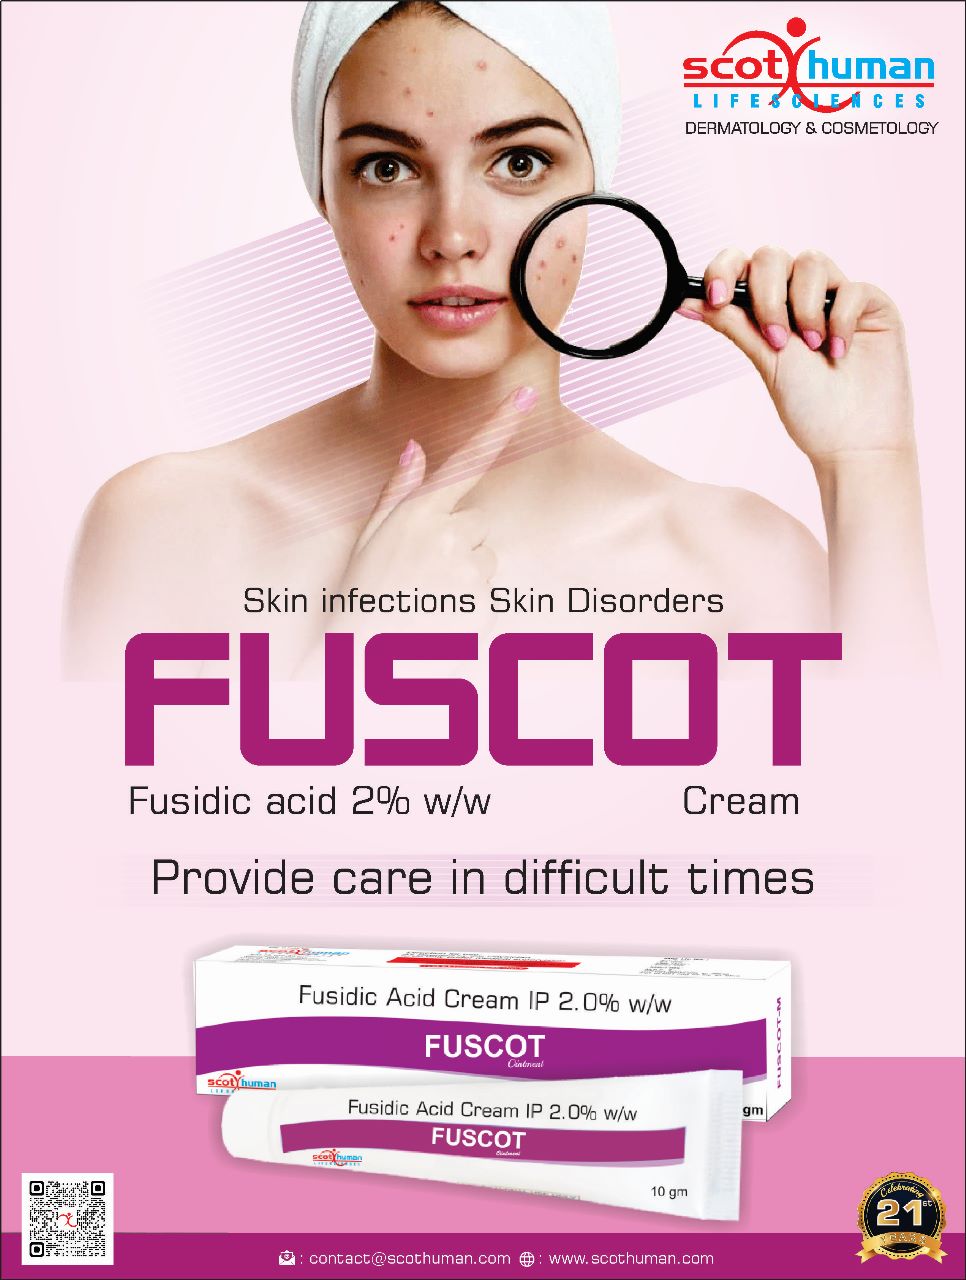 Product Name: Fuscot, Compositions of Fuscot are Fisidic Acid Cream IP 2.0 % w/w - Pharma Drugs and Chemicals